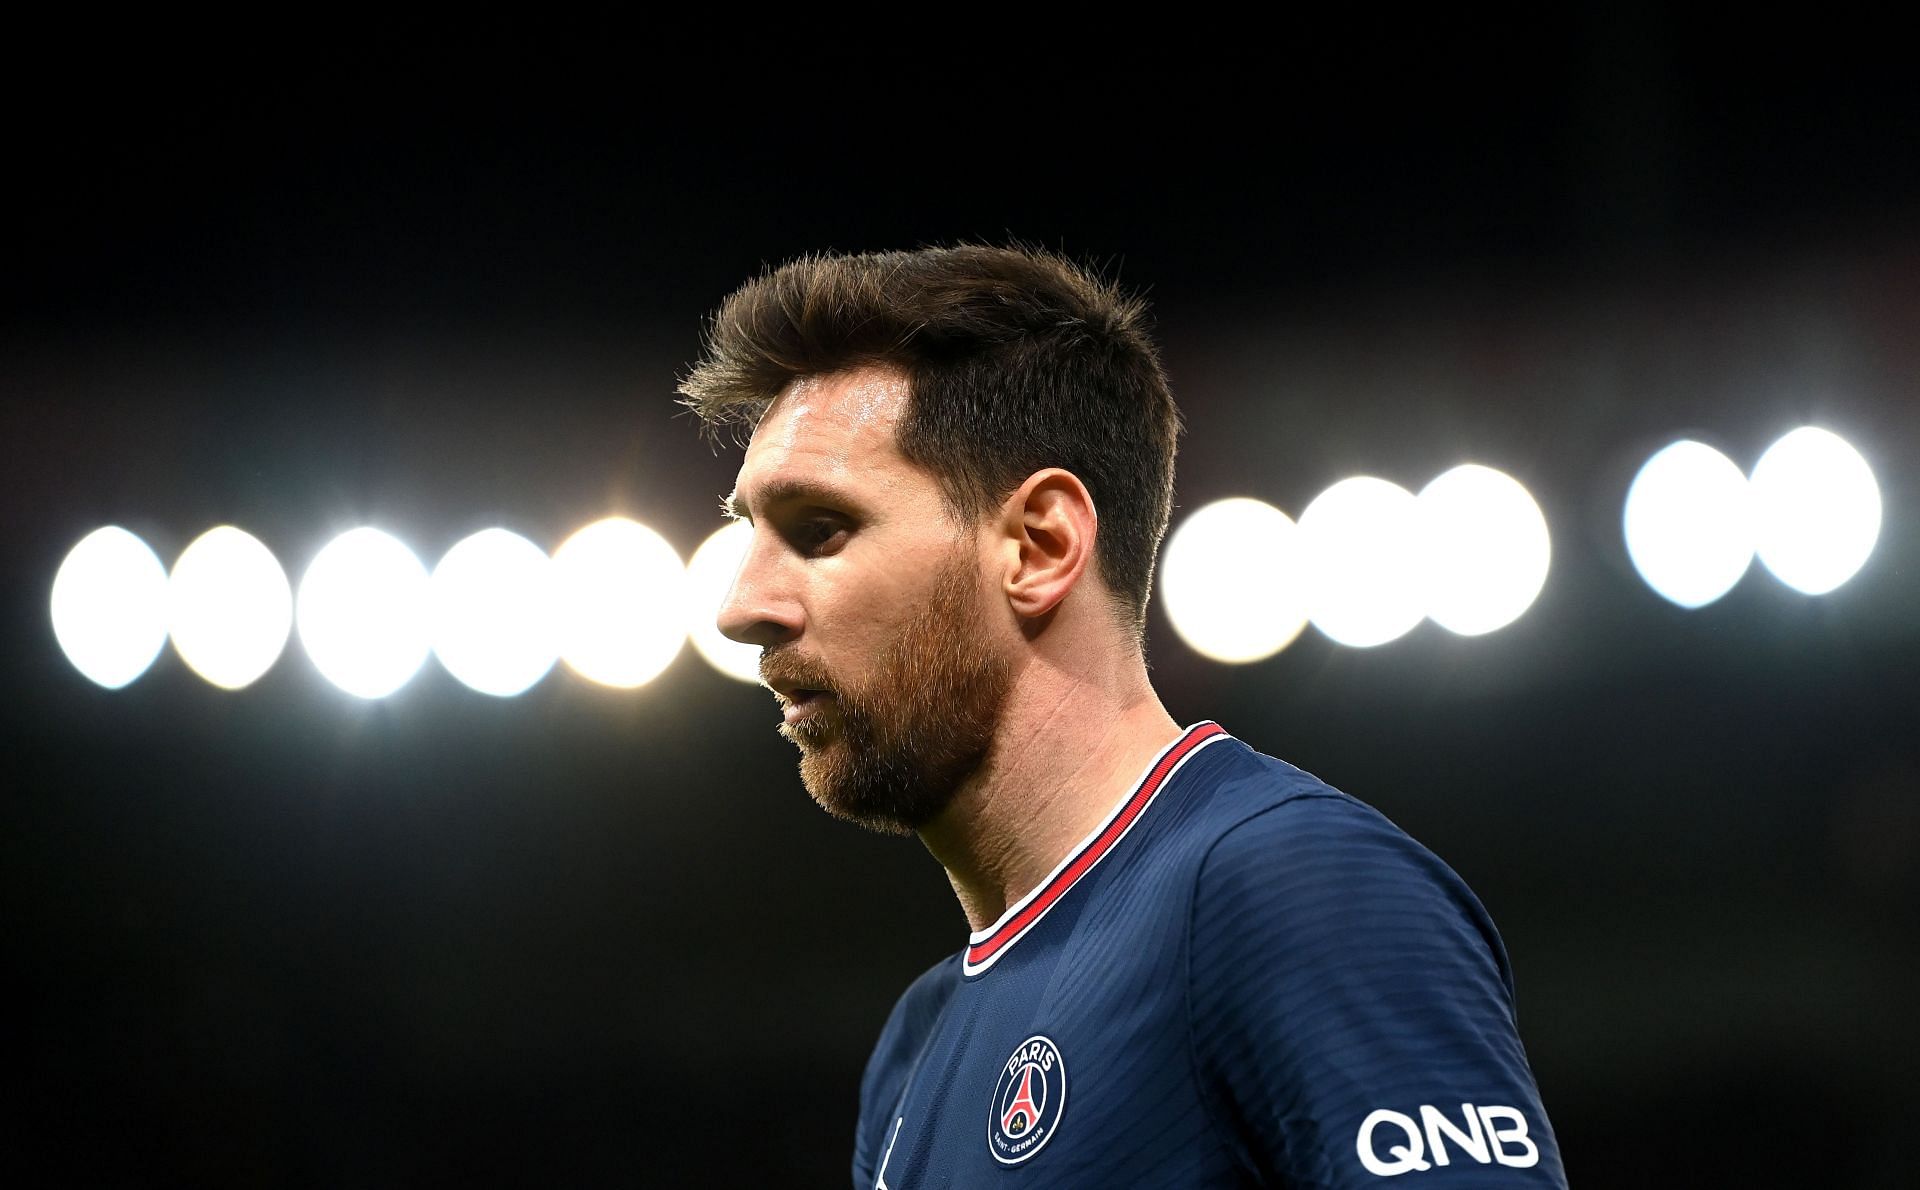 Lionel Messi has been named the favourite for the Ballon d&rsquo;Or award by Mauricio Pochettino.